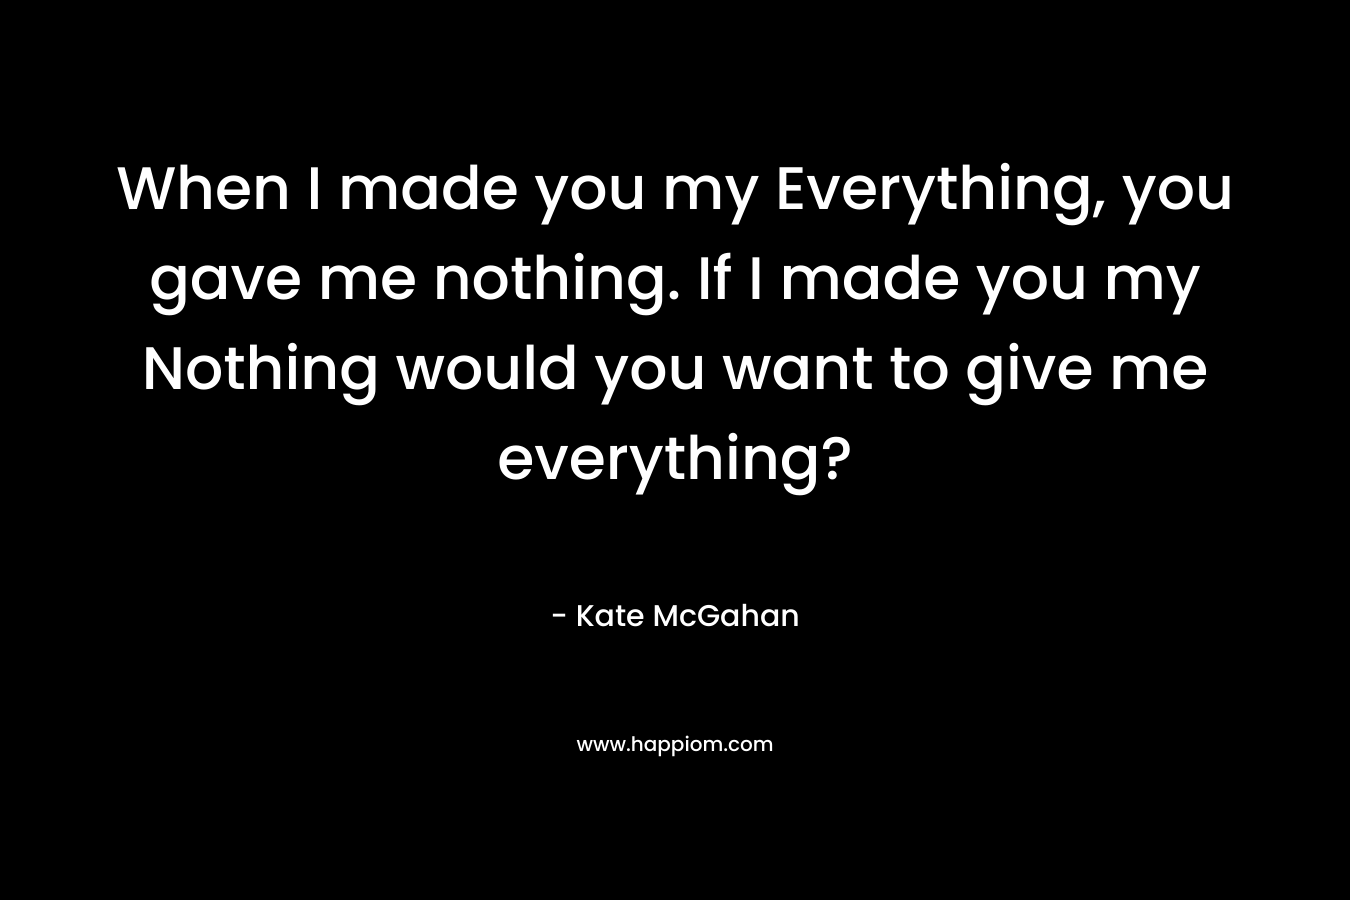 When I made you my Everything, you gave me nothing. If I made you my Nothing would you want to give me everything?